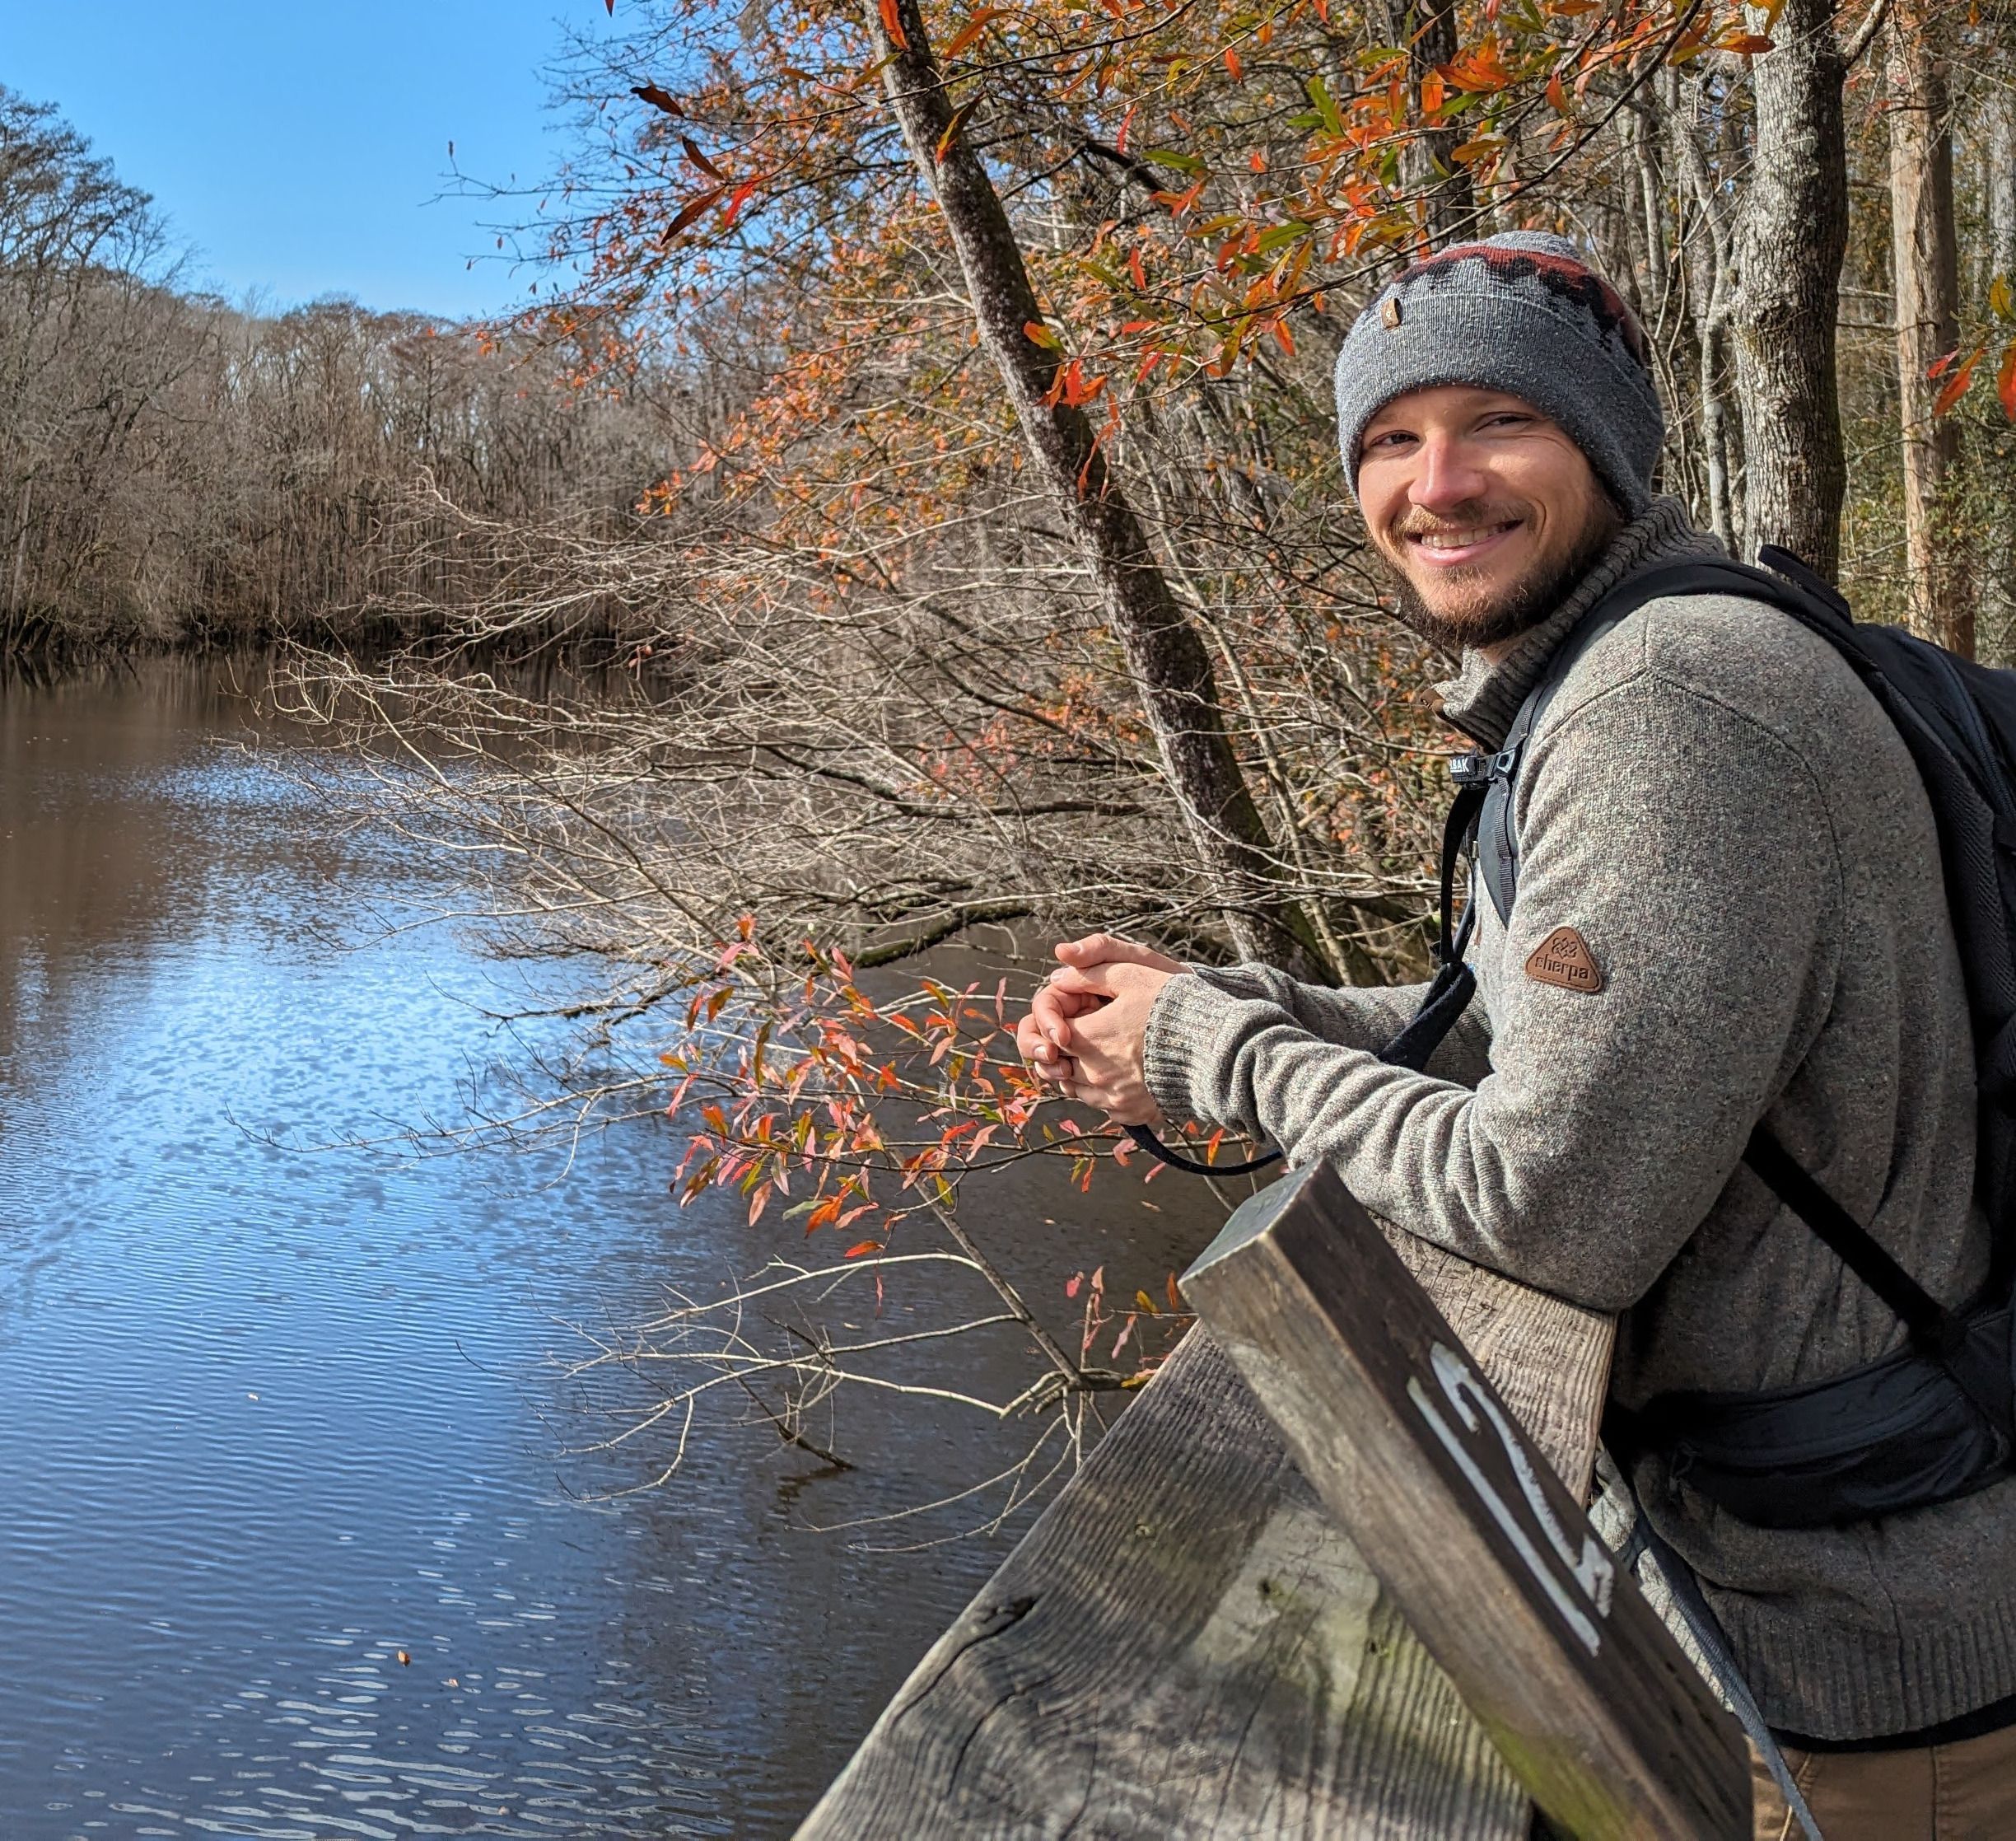 Chris leaning against a railing at Congaree National Park